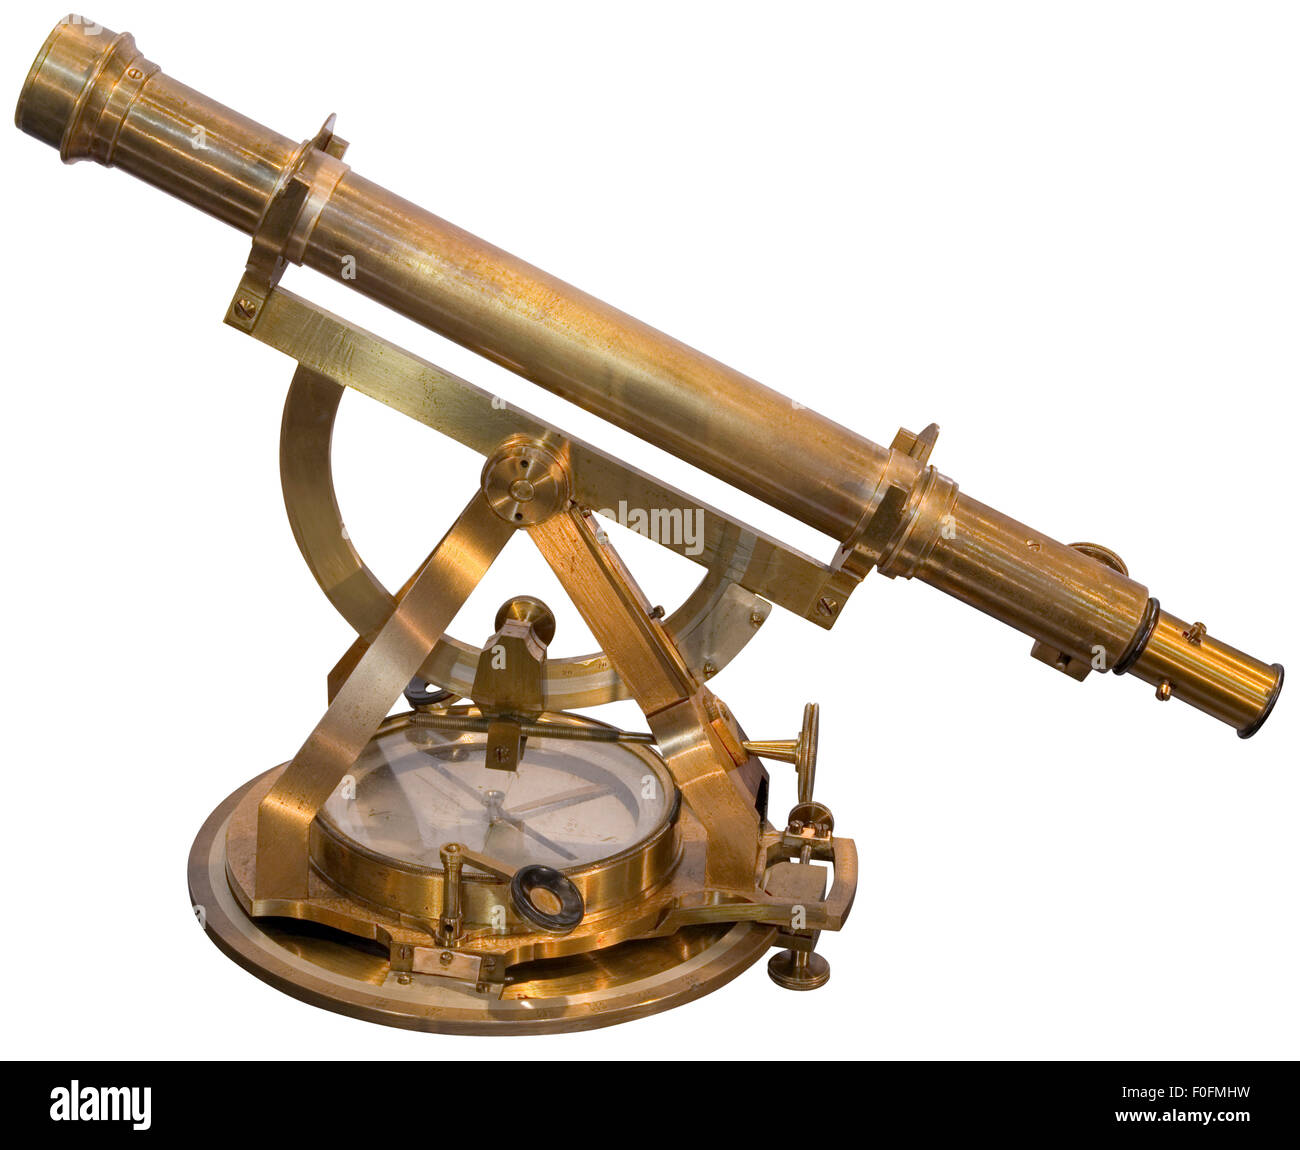 Old brass sextant instrument for measuring the ange between any two visible objects Stock Photo